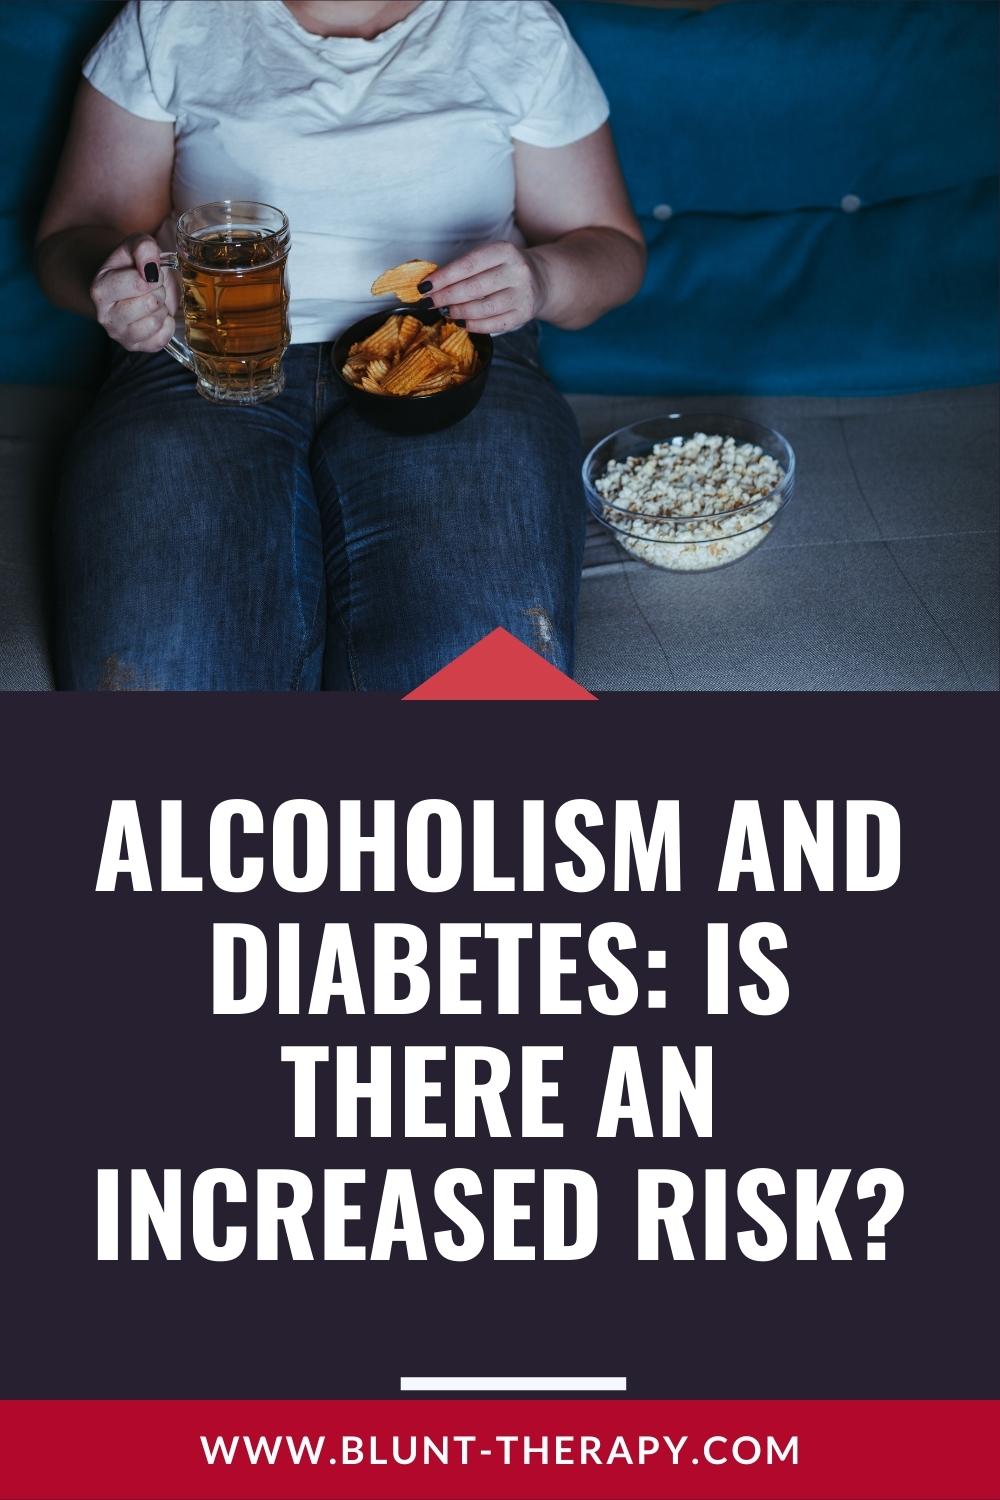 Alcoholism and Diabetes: Is There an Increased Risk?